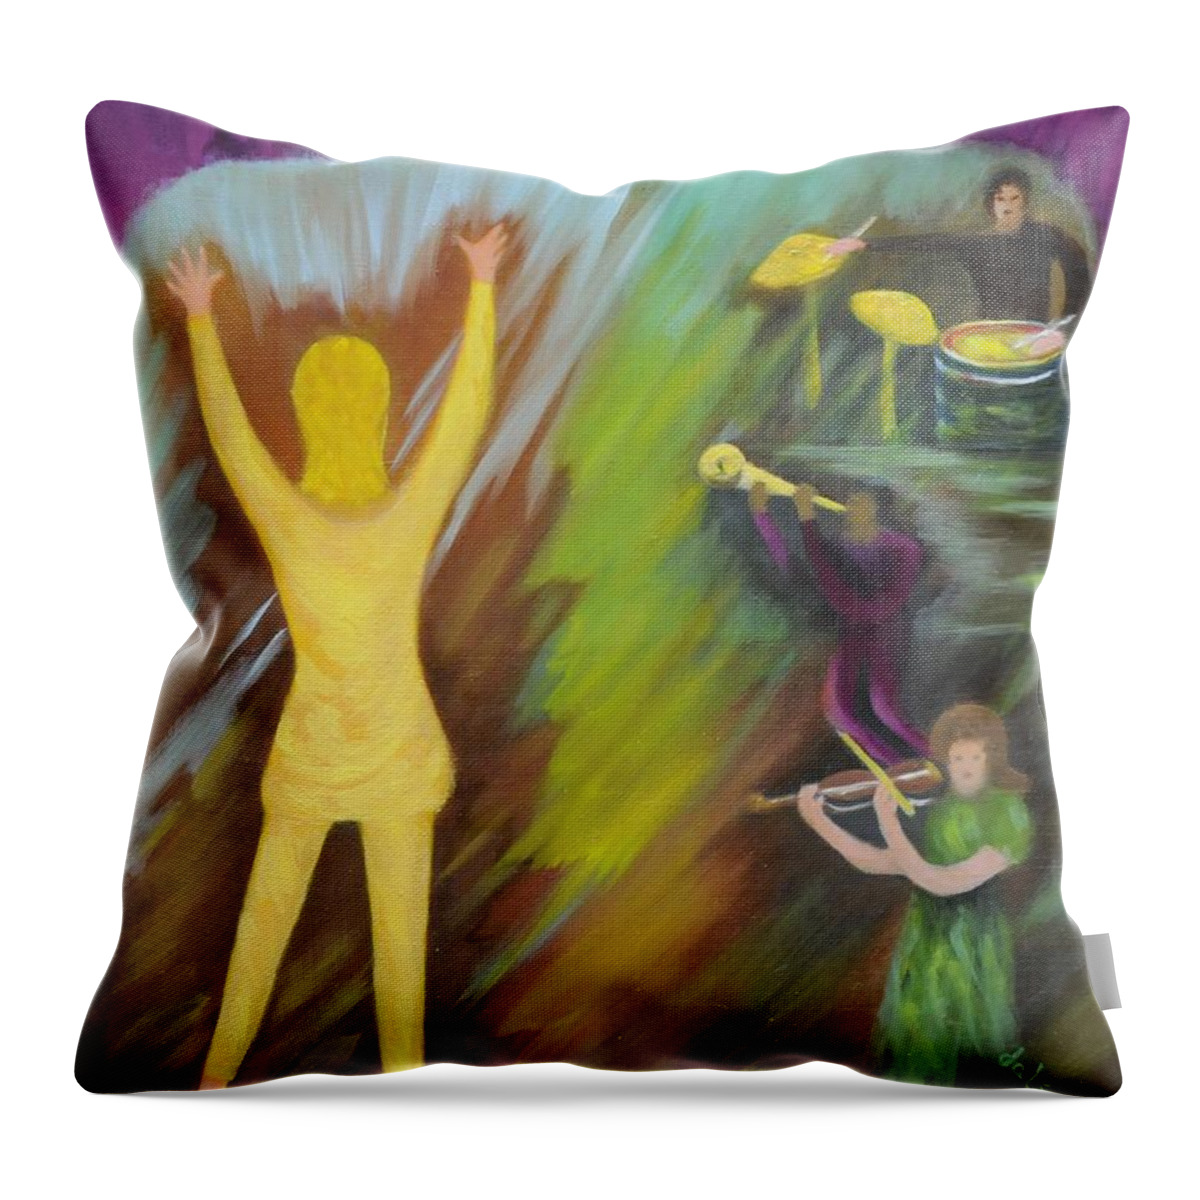 Dancer Throw Pillow featuring the painting Goldfinger by Douglas Ann Slusher